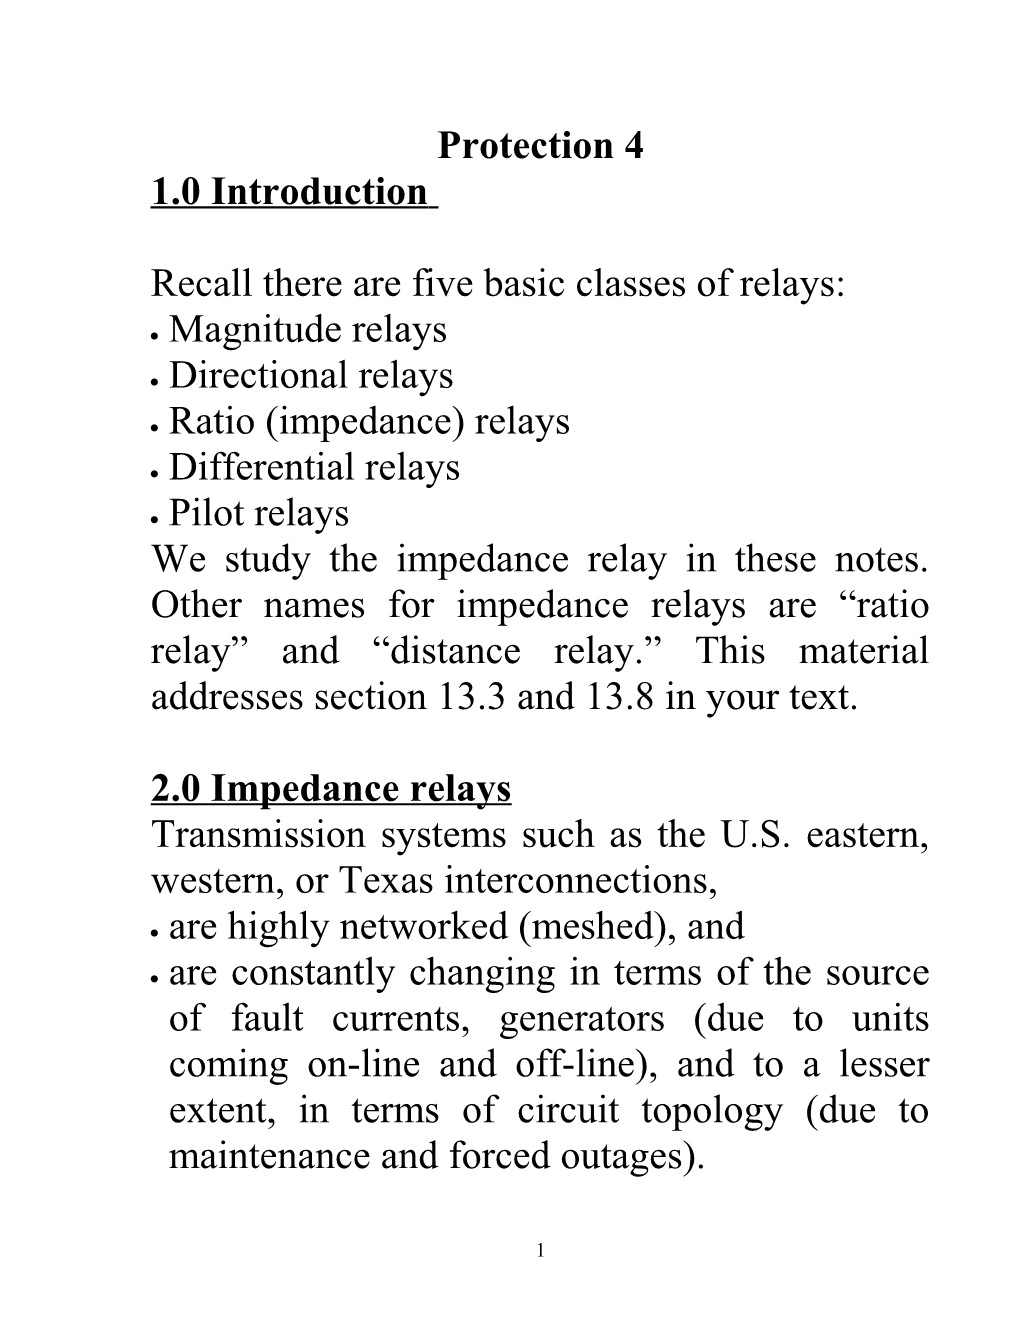 Recall There Are Five Basic Classes of Relays